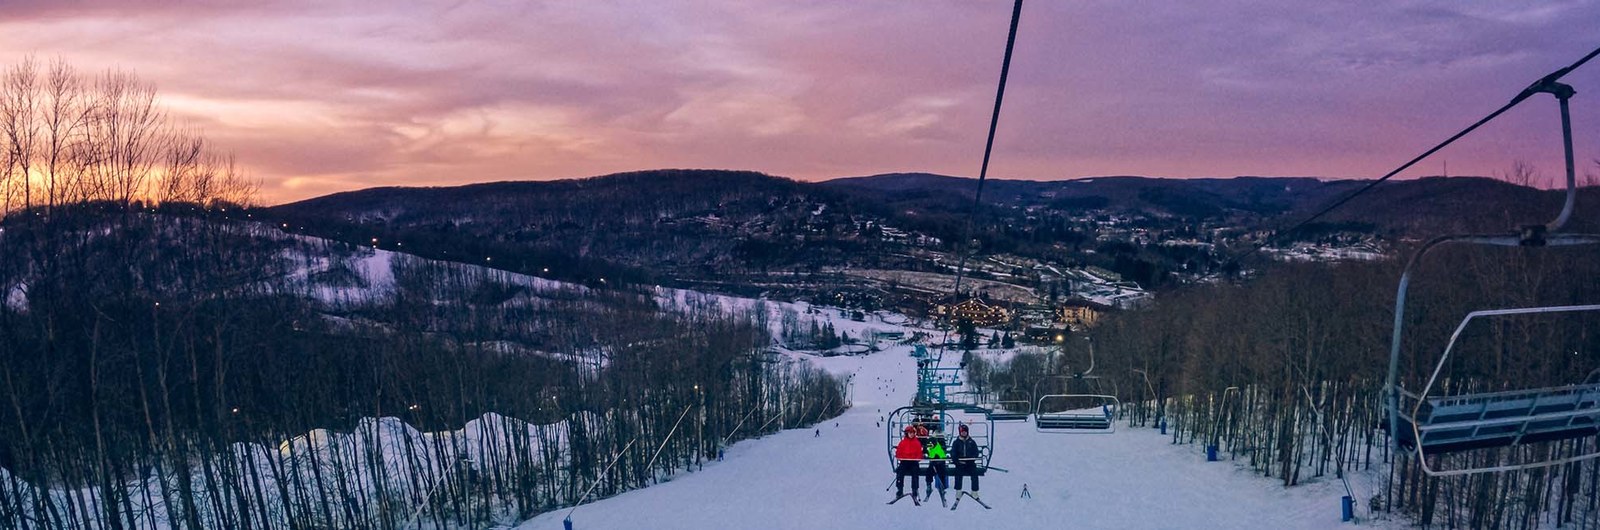 People riding a chairlift with a beautiful sunset in the background